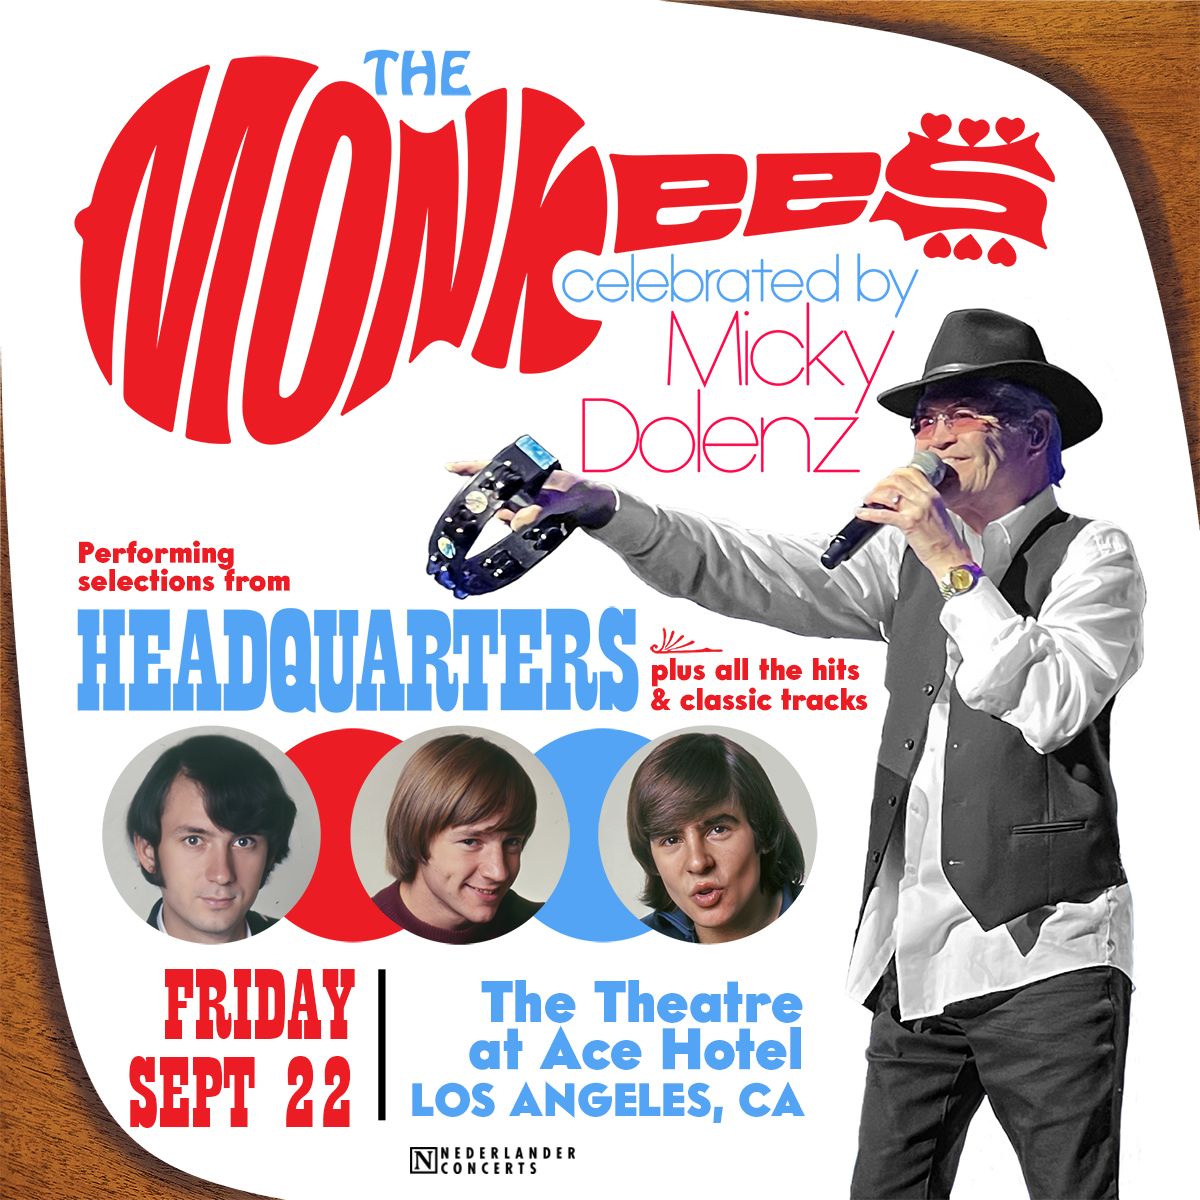 Pictured: Micky Dolenz Text: The Monkees celebrated by Micky Dolenz Performing selctions from HEADQUARTERS plus all the hits & classic tracks Friday September 22 The Theatre at Ace Hotel Los Angeles, CA